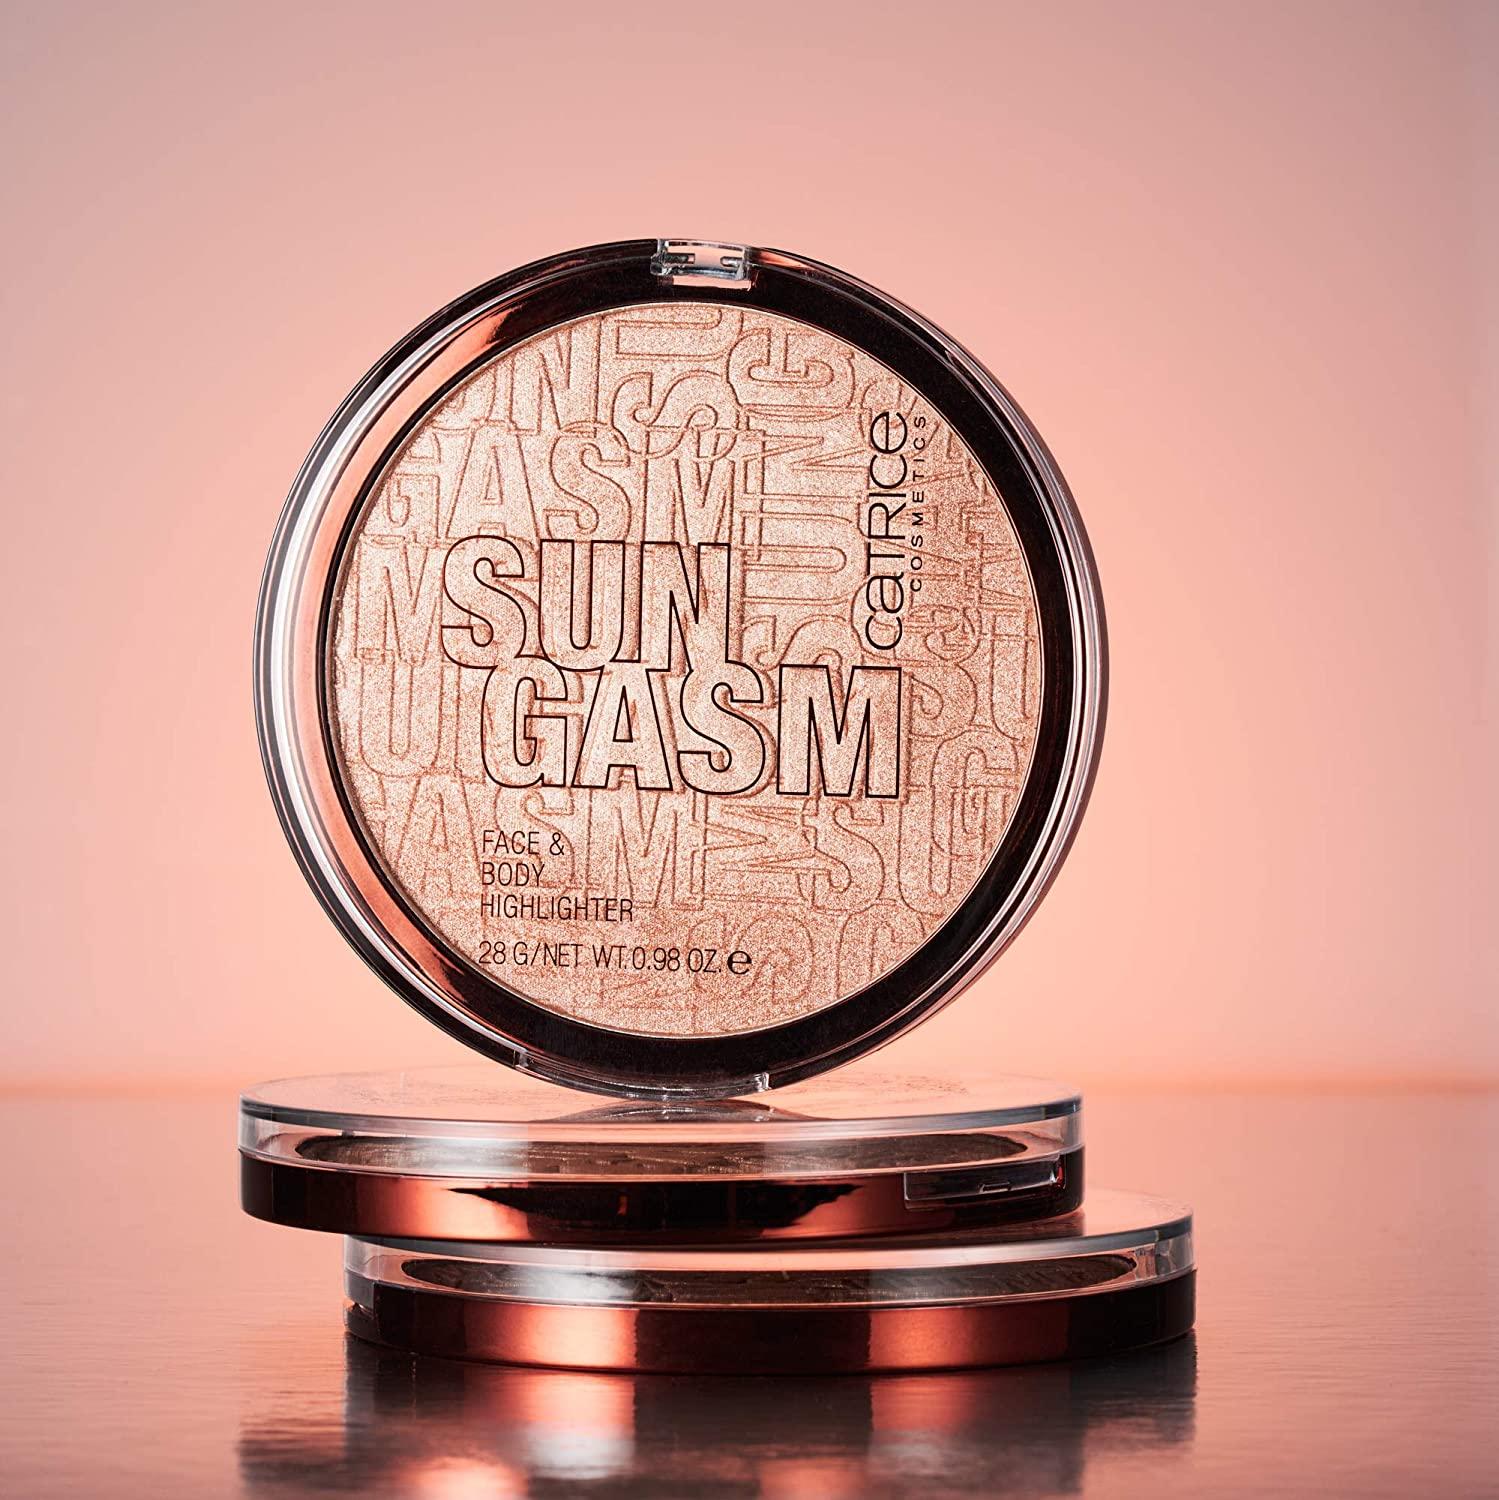 Catrice | SUNGASM Face & Body Highlighter | Jumbo Sized, Silky Soft Powder  With Light Reflecting Pigments | For All Skintones | Vegan, Paraben Free,  Oil Free | Cruelty Free